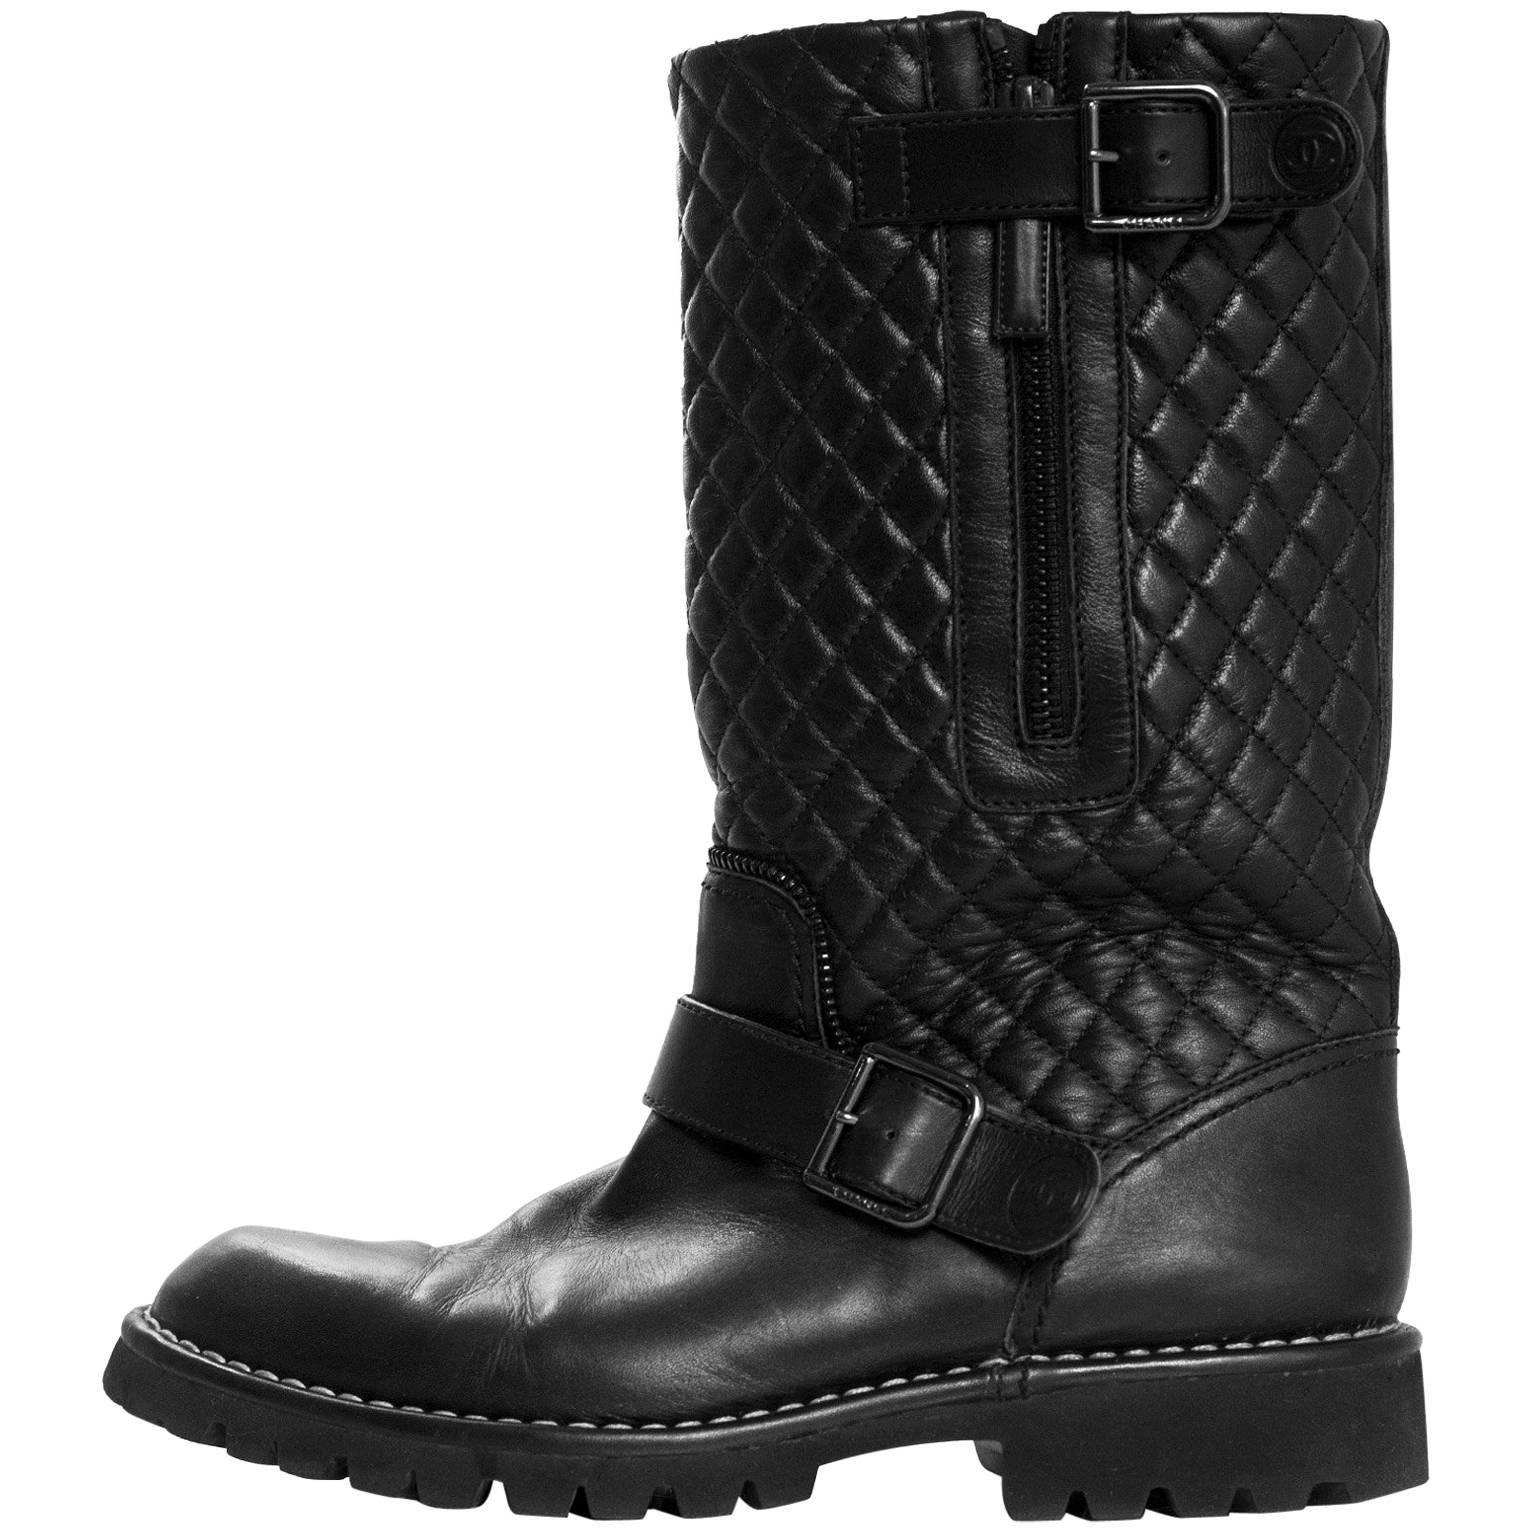 Chanel Black Quilted Leather Biker Boots Sz 38.5